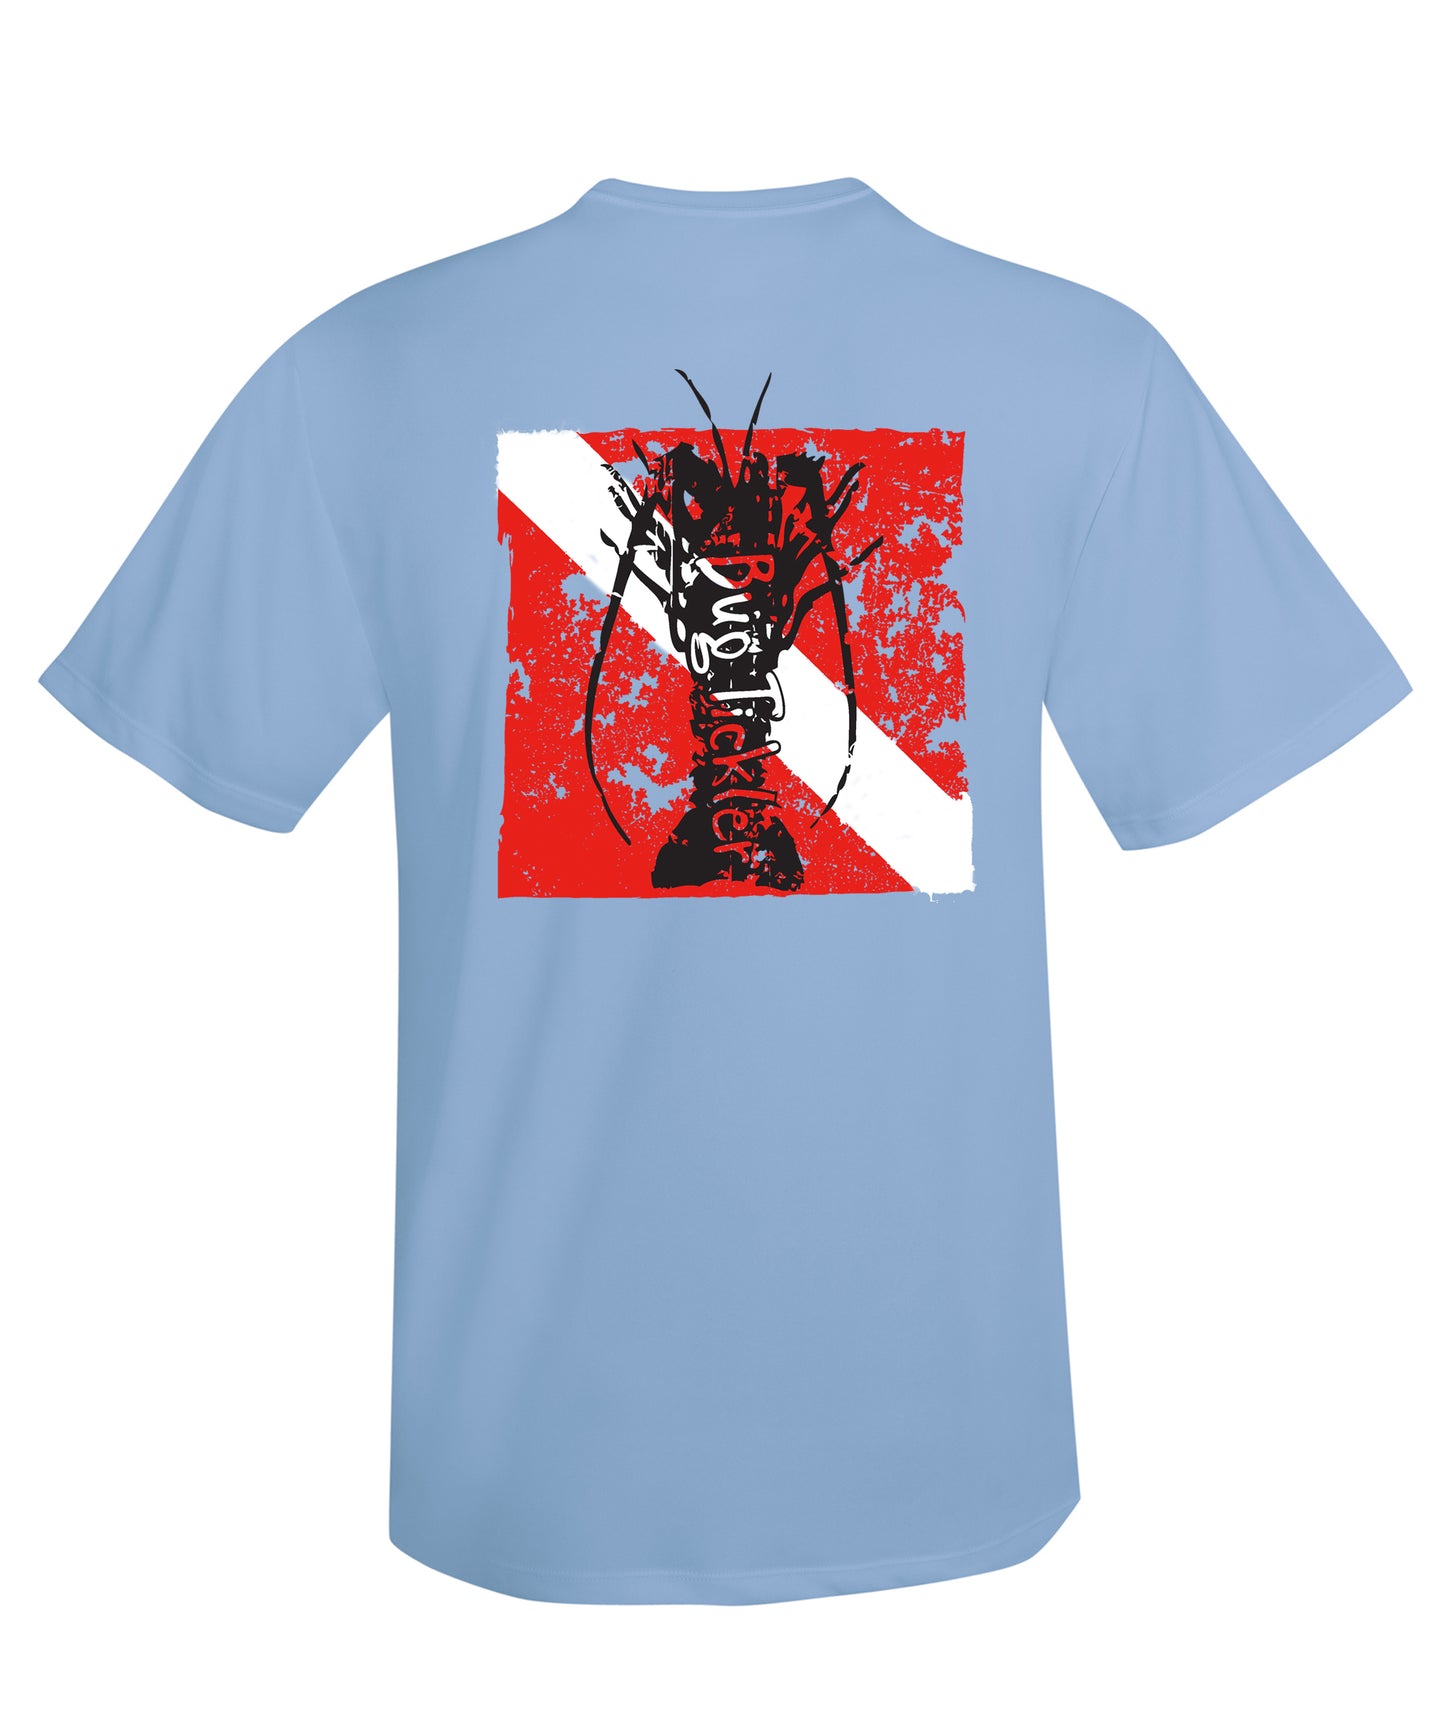 Lobster Performance Dry-Fit Fishing shirts with Sun Protection - "Bug Tickler" Dive Logo - Lt. Blue Short Sleeve